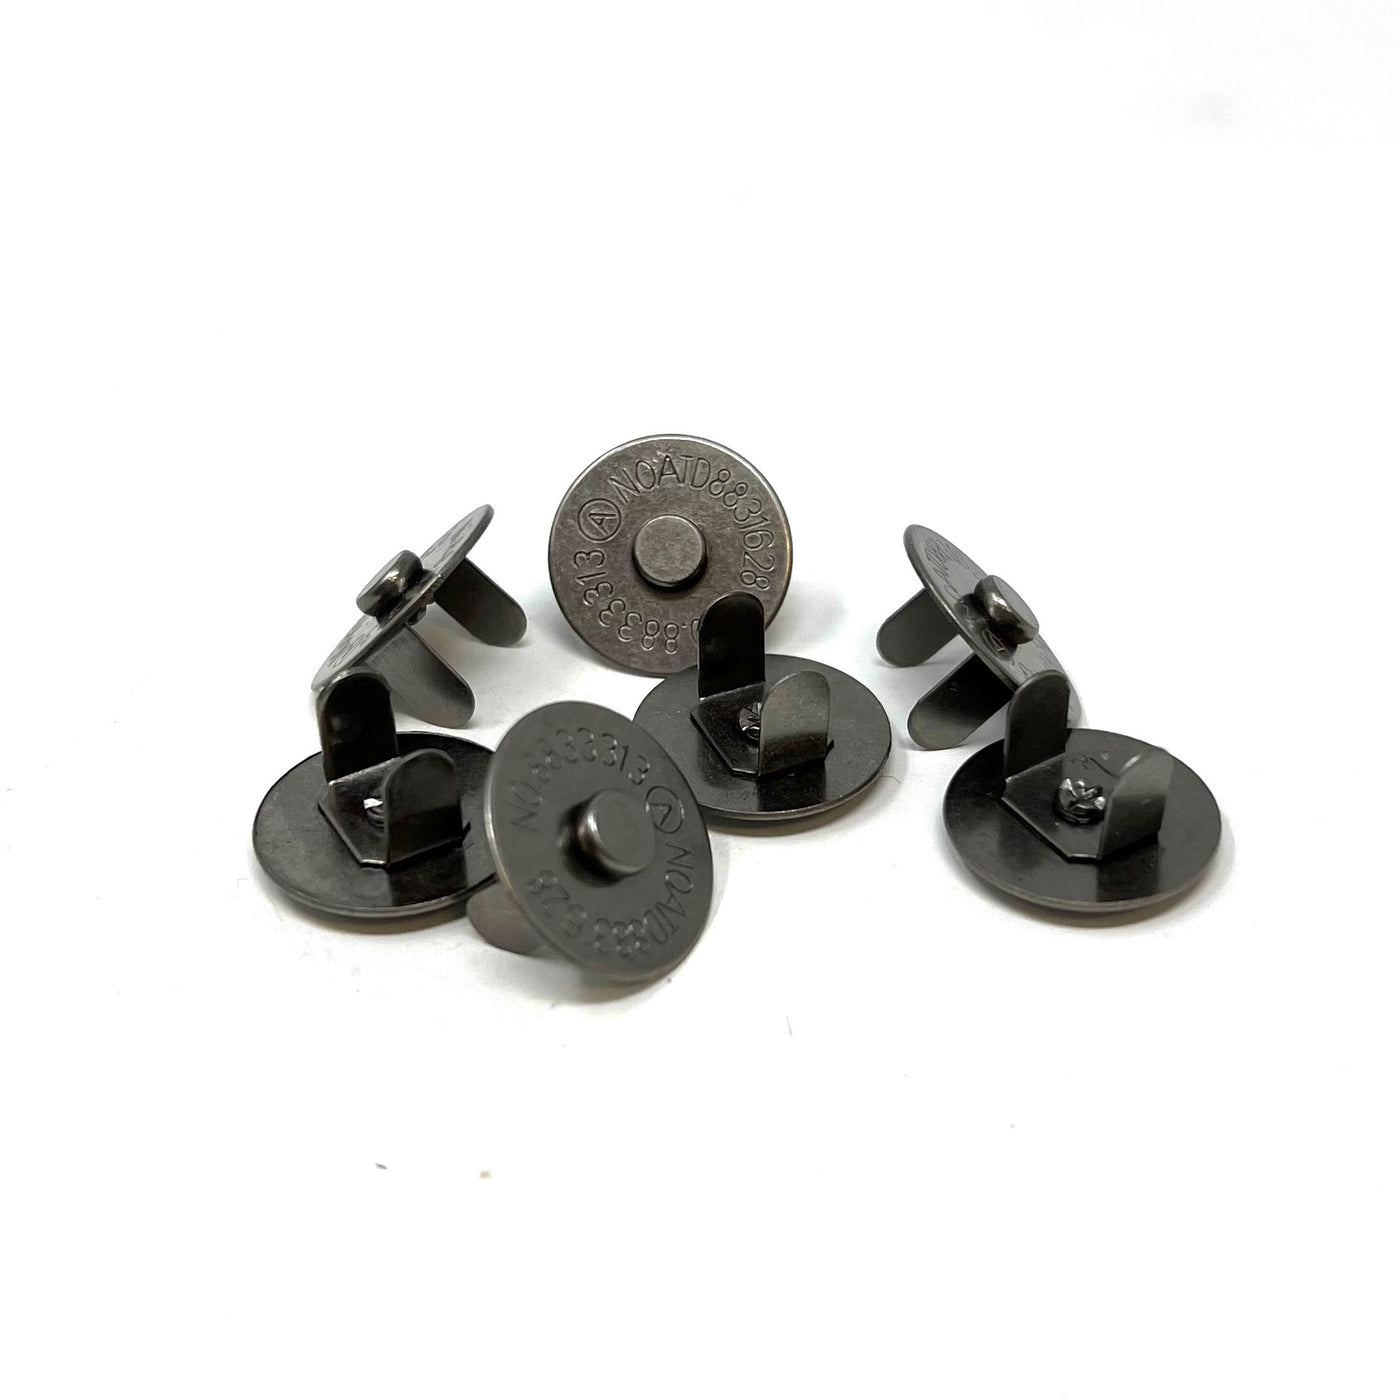 Metal magnetic handbag bag clasps buttons snaps fasteners poppers for bag making. 18mm